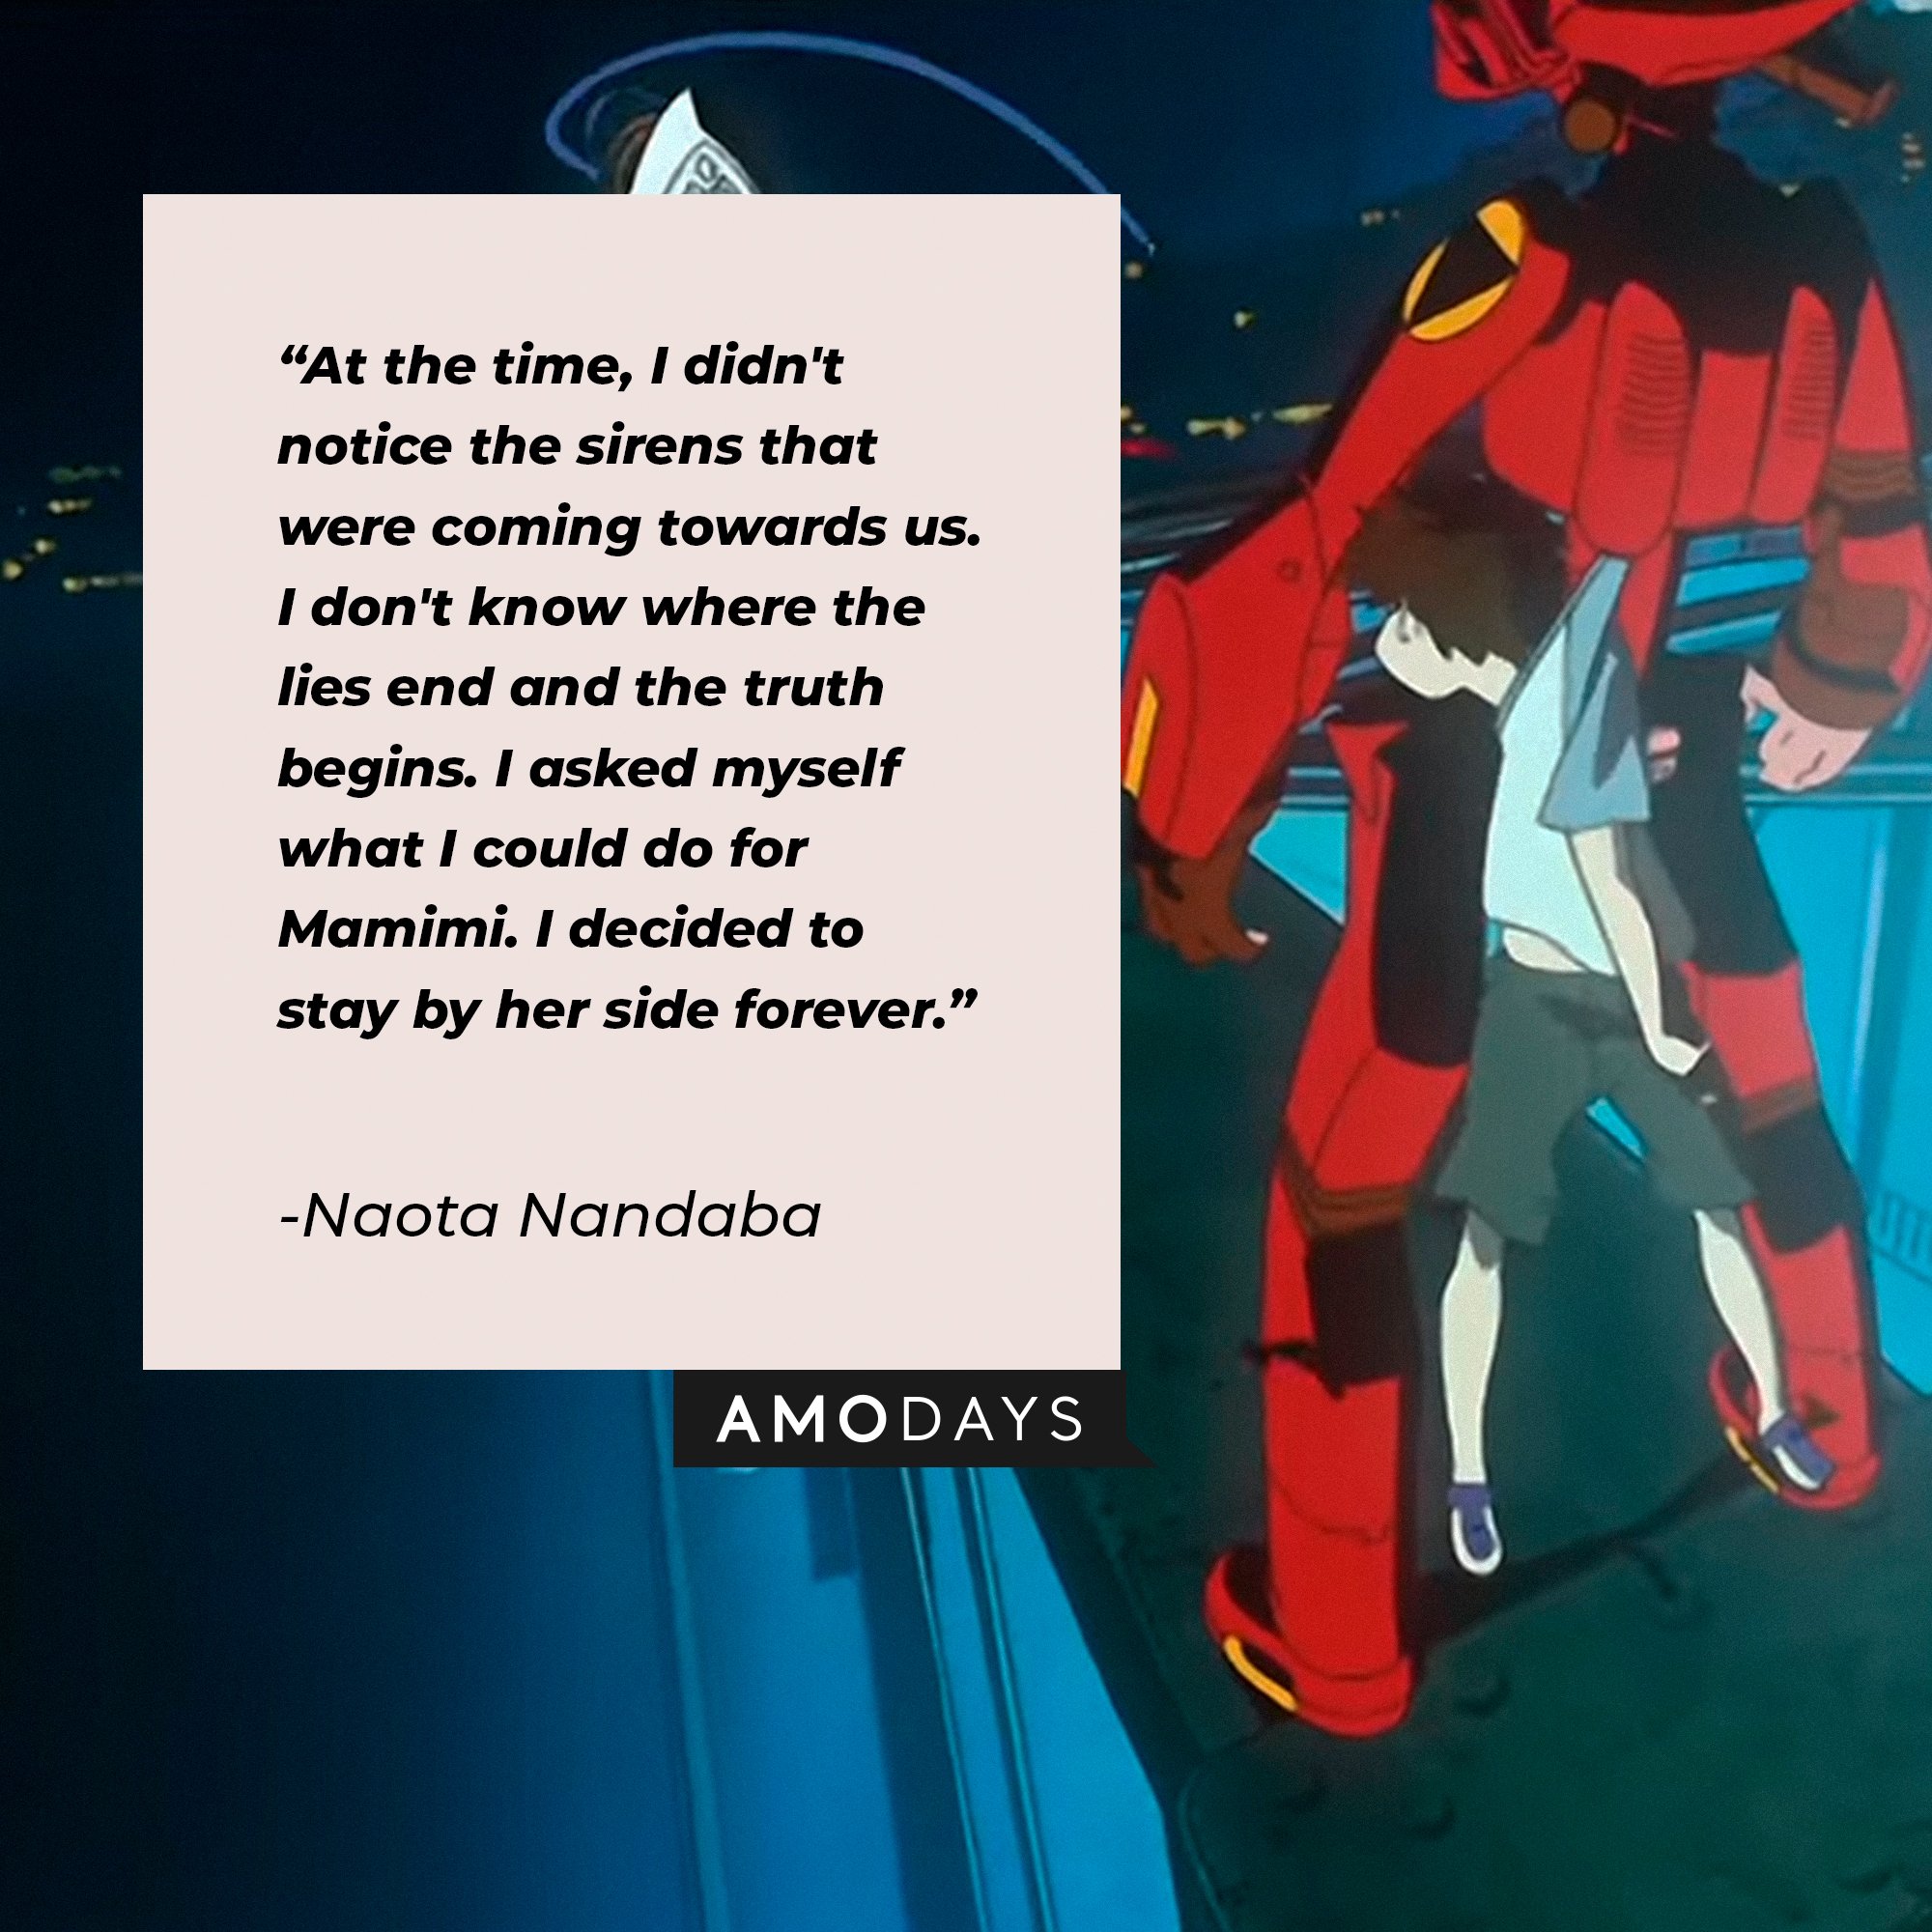 Naota Nandaba’s quote: “At the time, I didn't notice the sirens that were coming towards us. I don't know where the lies end and the truth begins. I asked myself what I could do for Mamimi. I decided to stay by her side forever." | Image: AmoDays